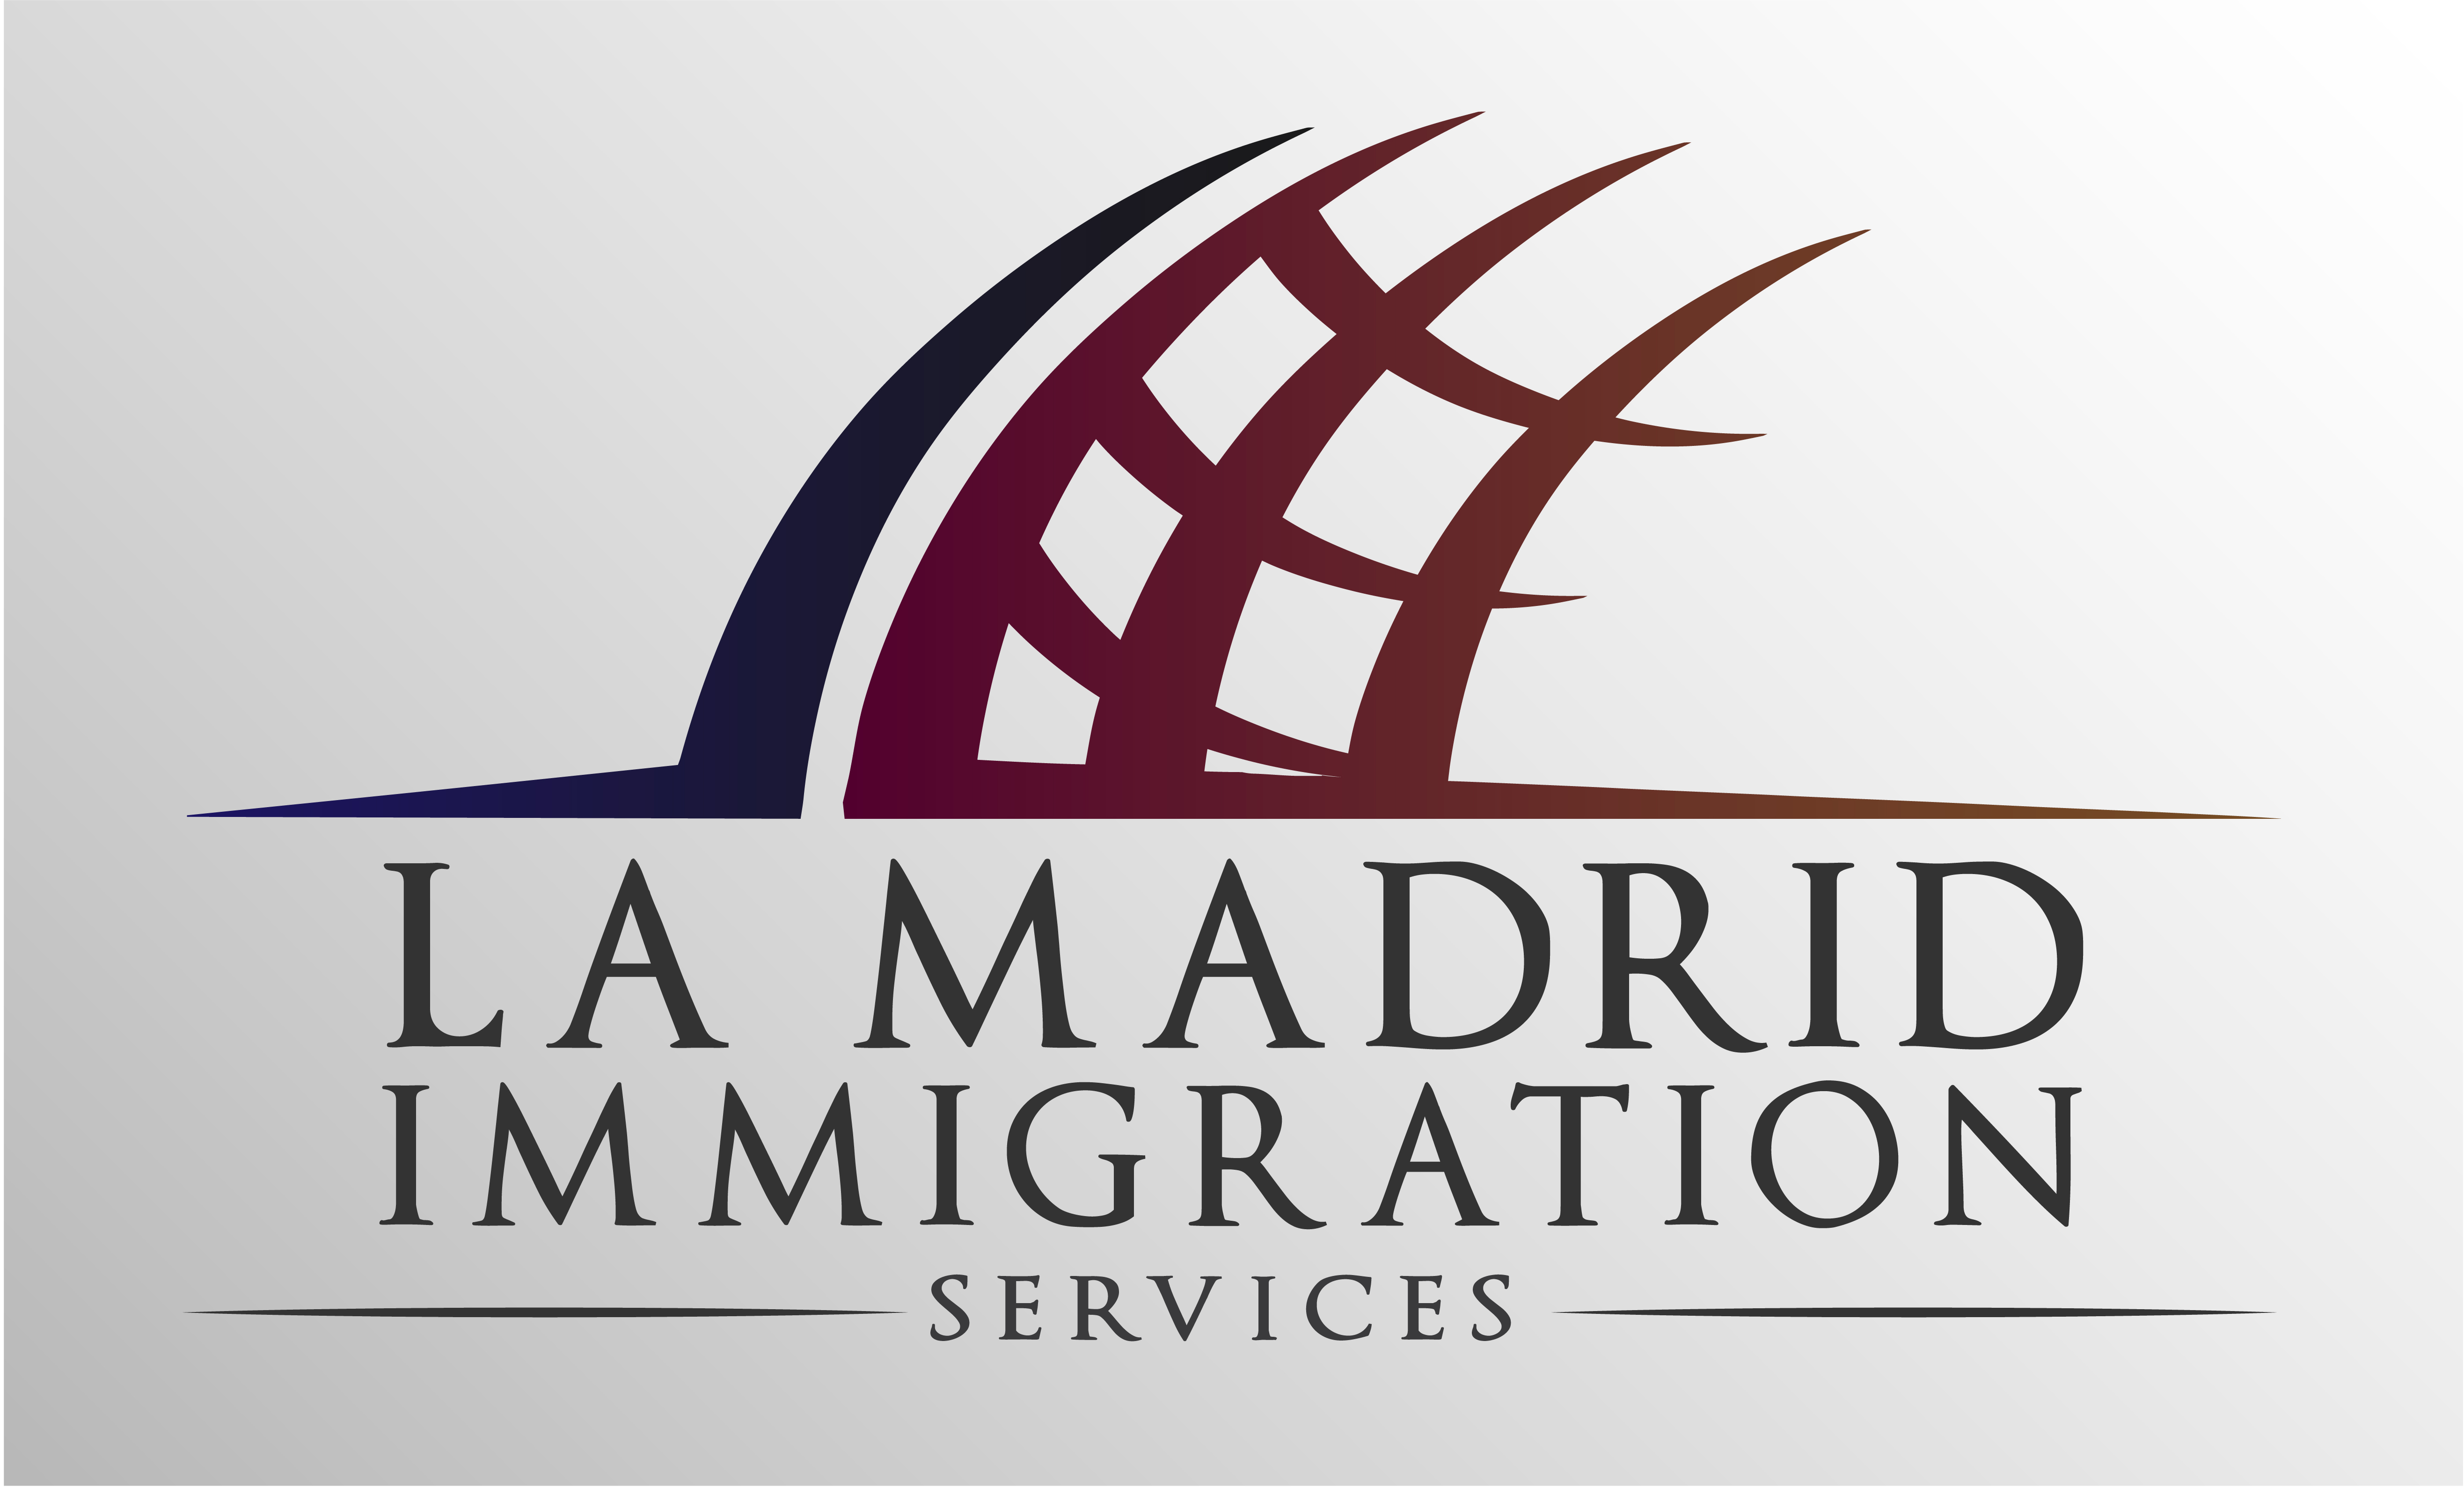 La Madrid Immigration Services, Friday, August 12, 2022, Press release picture